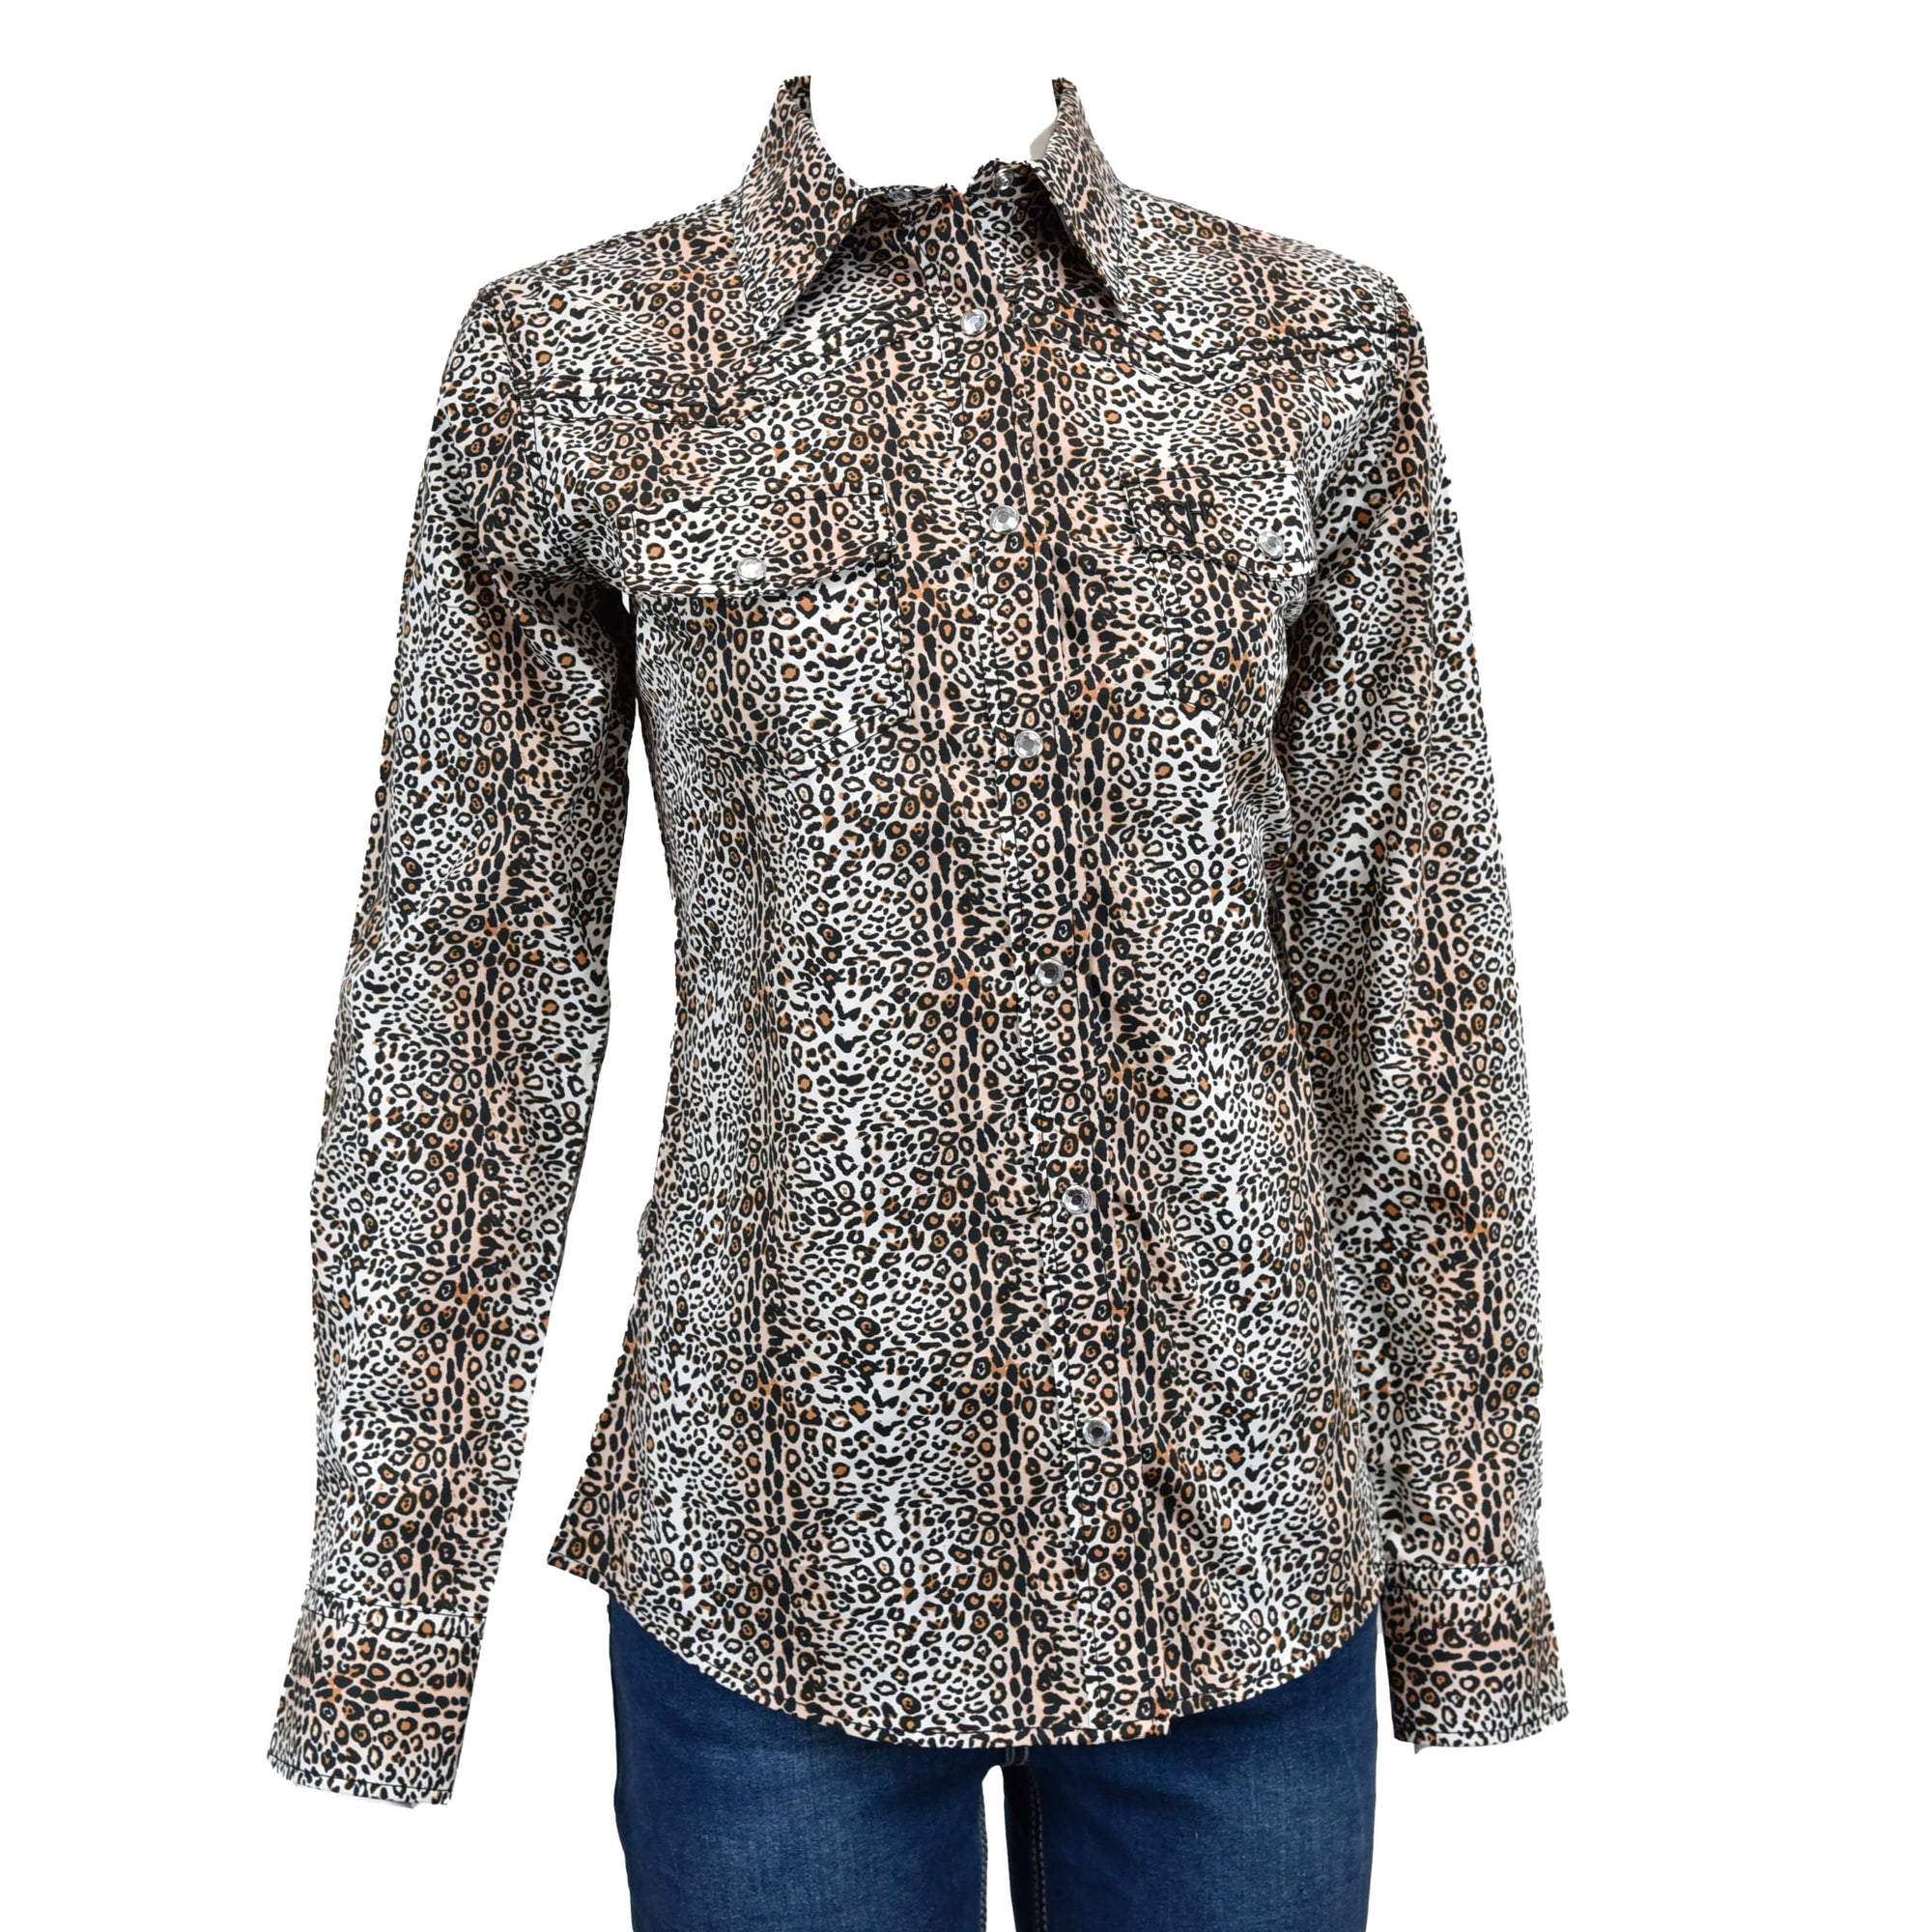 Women's Cowgirl Hardware Natural Leopard Long Sleeve Western Shirt from Cowboy Hardware